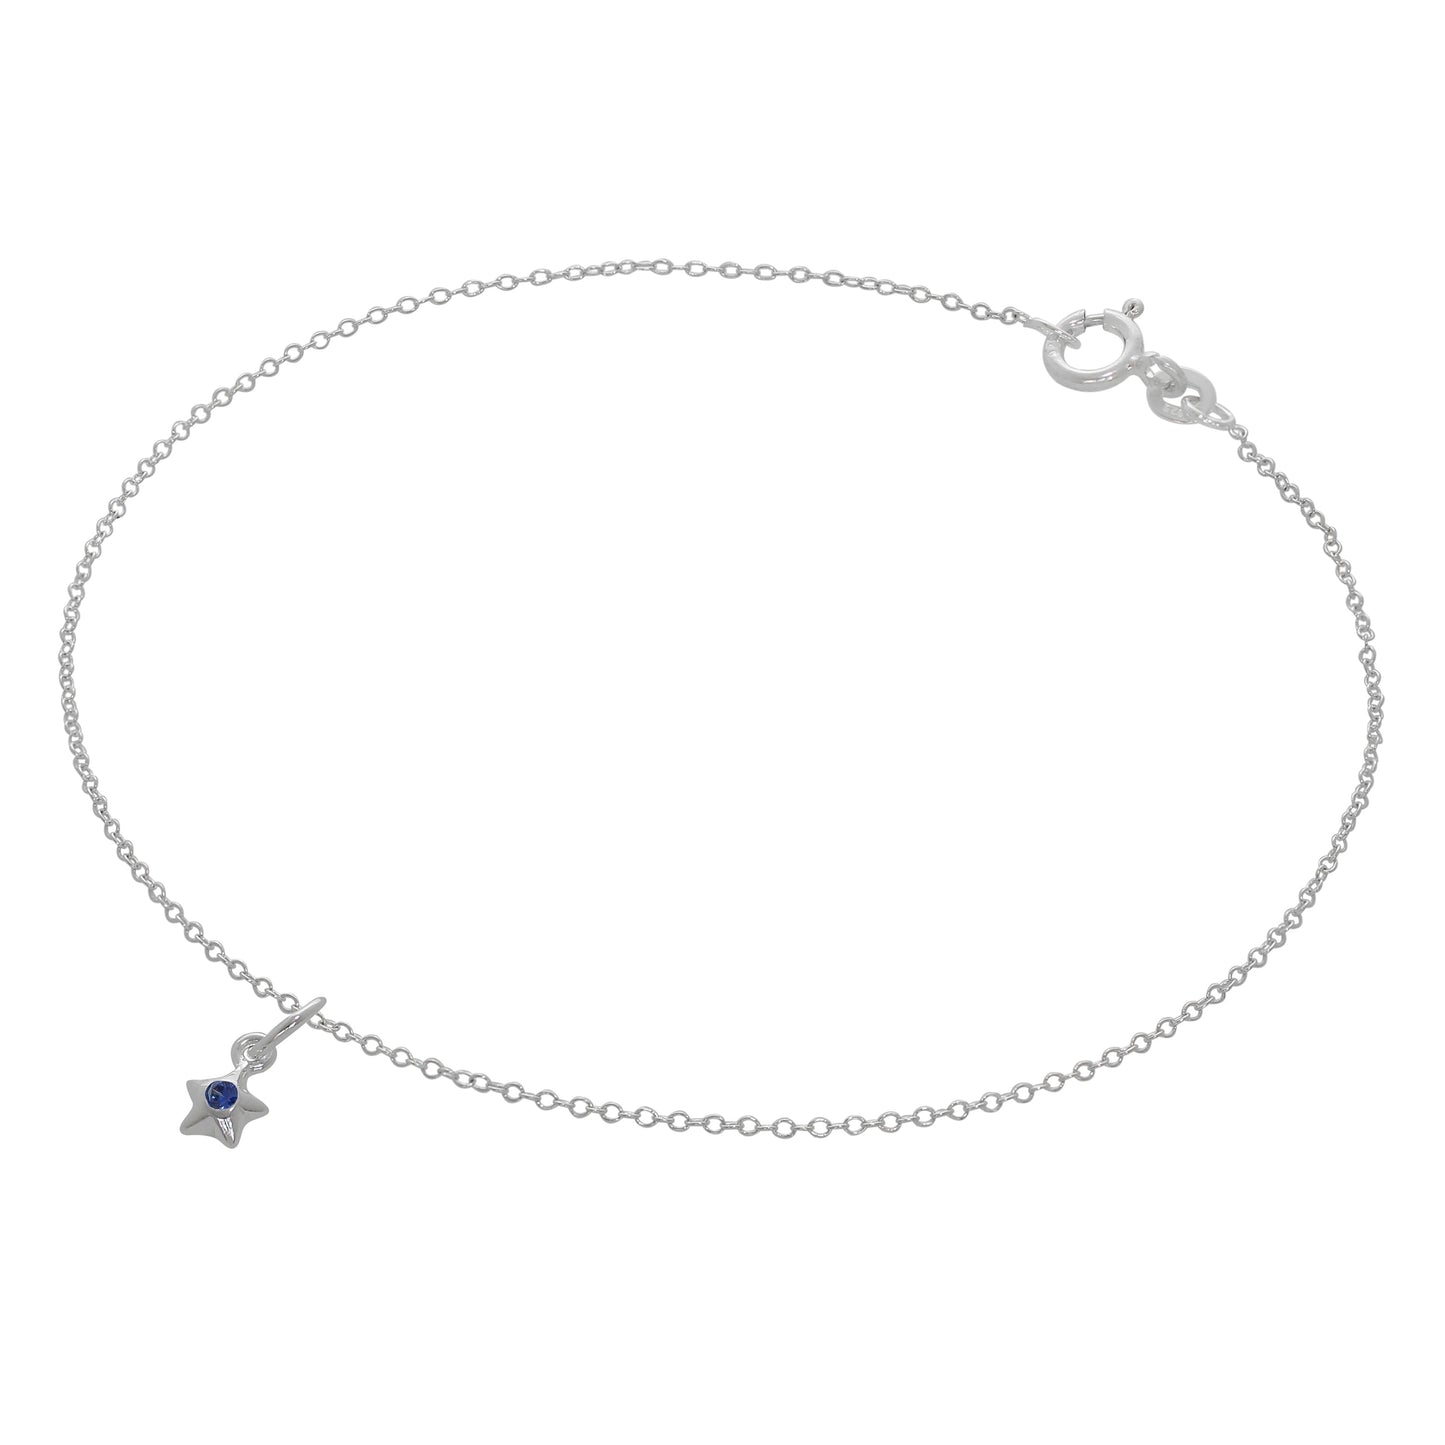 Fine Sterling Silver Belcher Anklet with CZ Crystal Birthstone Star Charm - 10 Inches